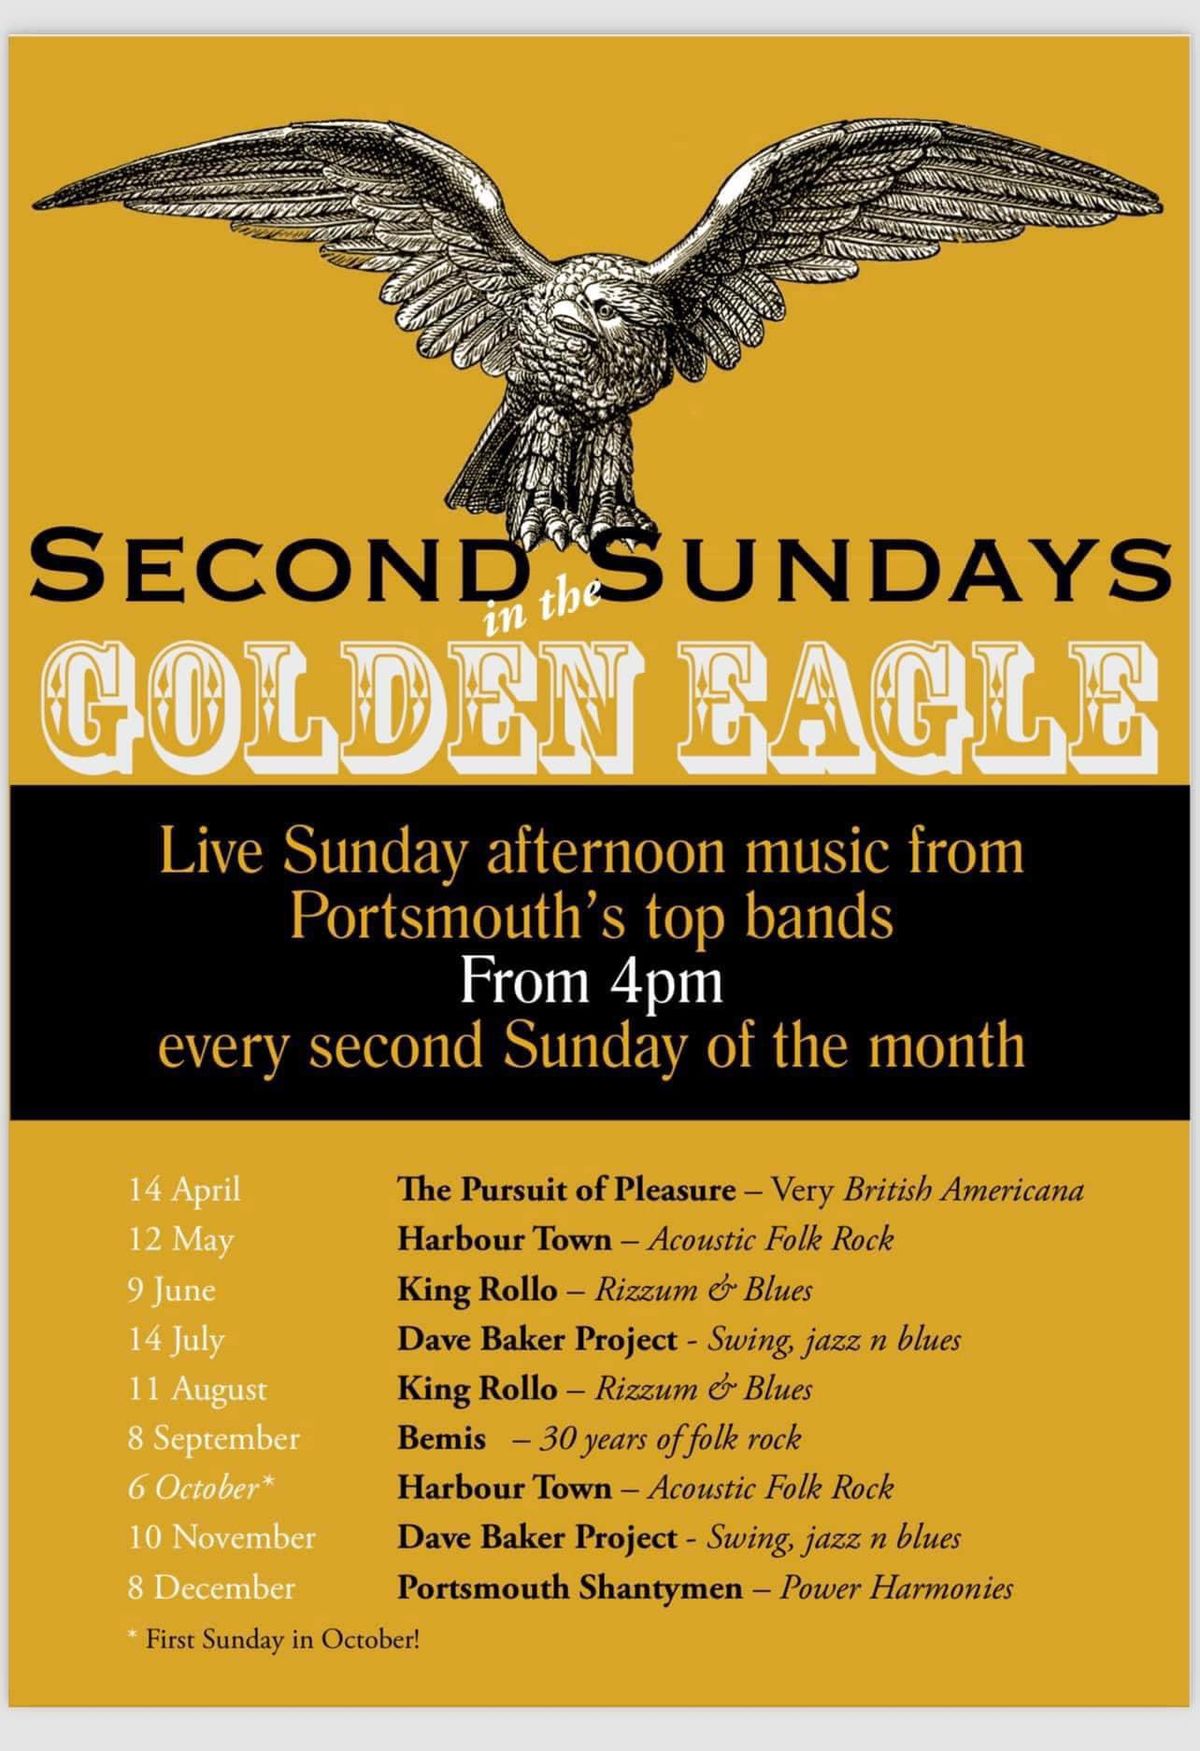 The DBP at The Golden Eagle Sunday 14th July 4pm